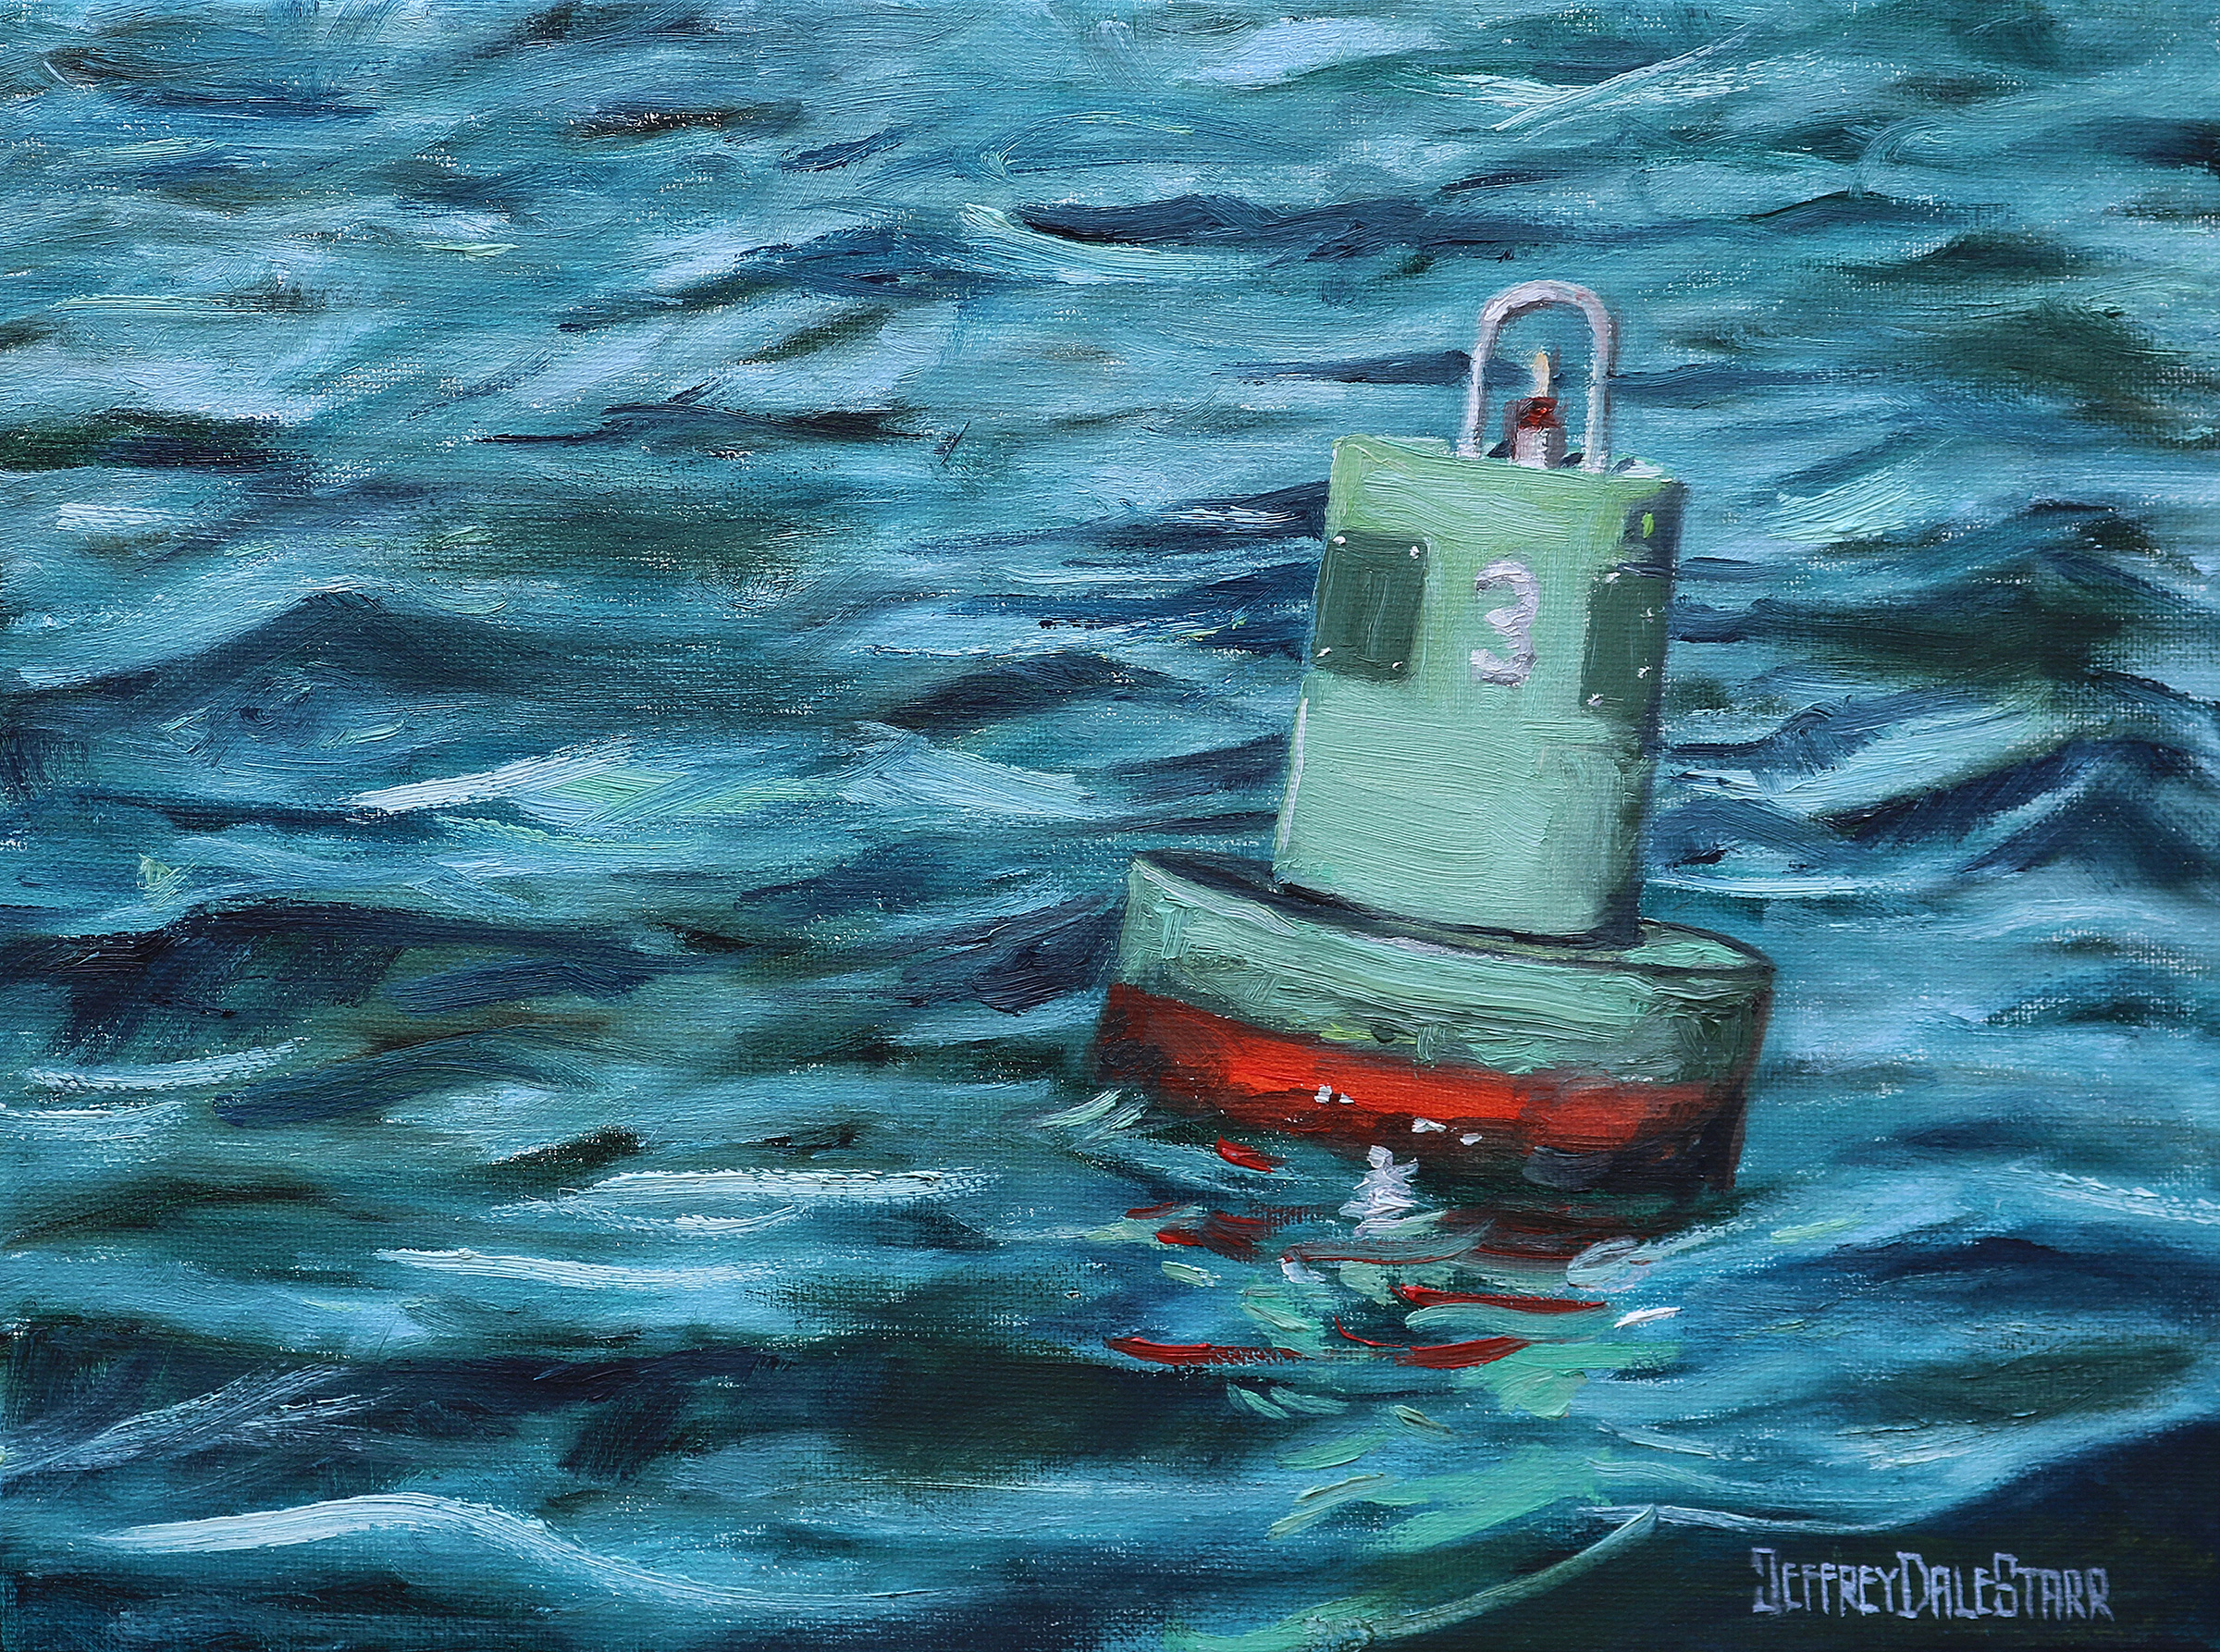 Oil painting "Buoy No. 3" by Jeffrey Dale Starr